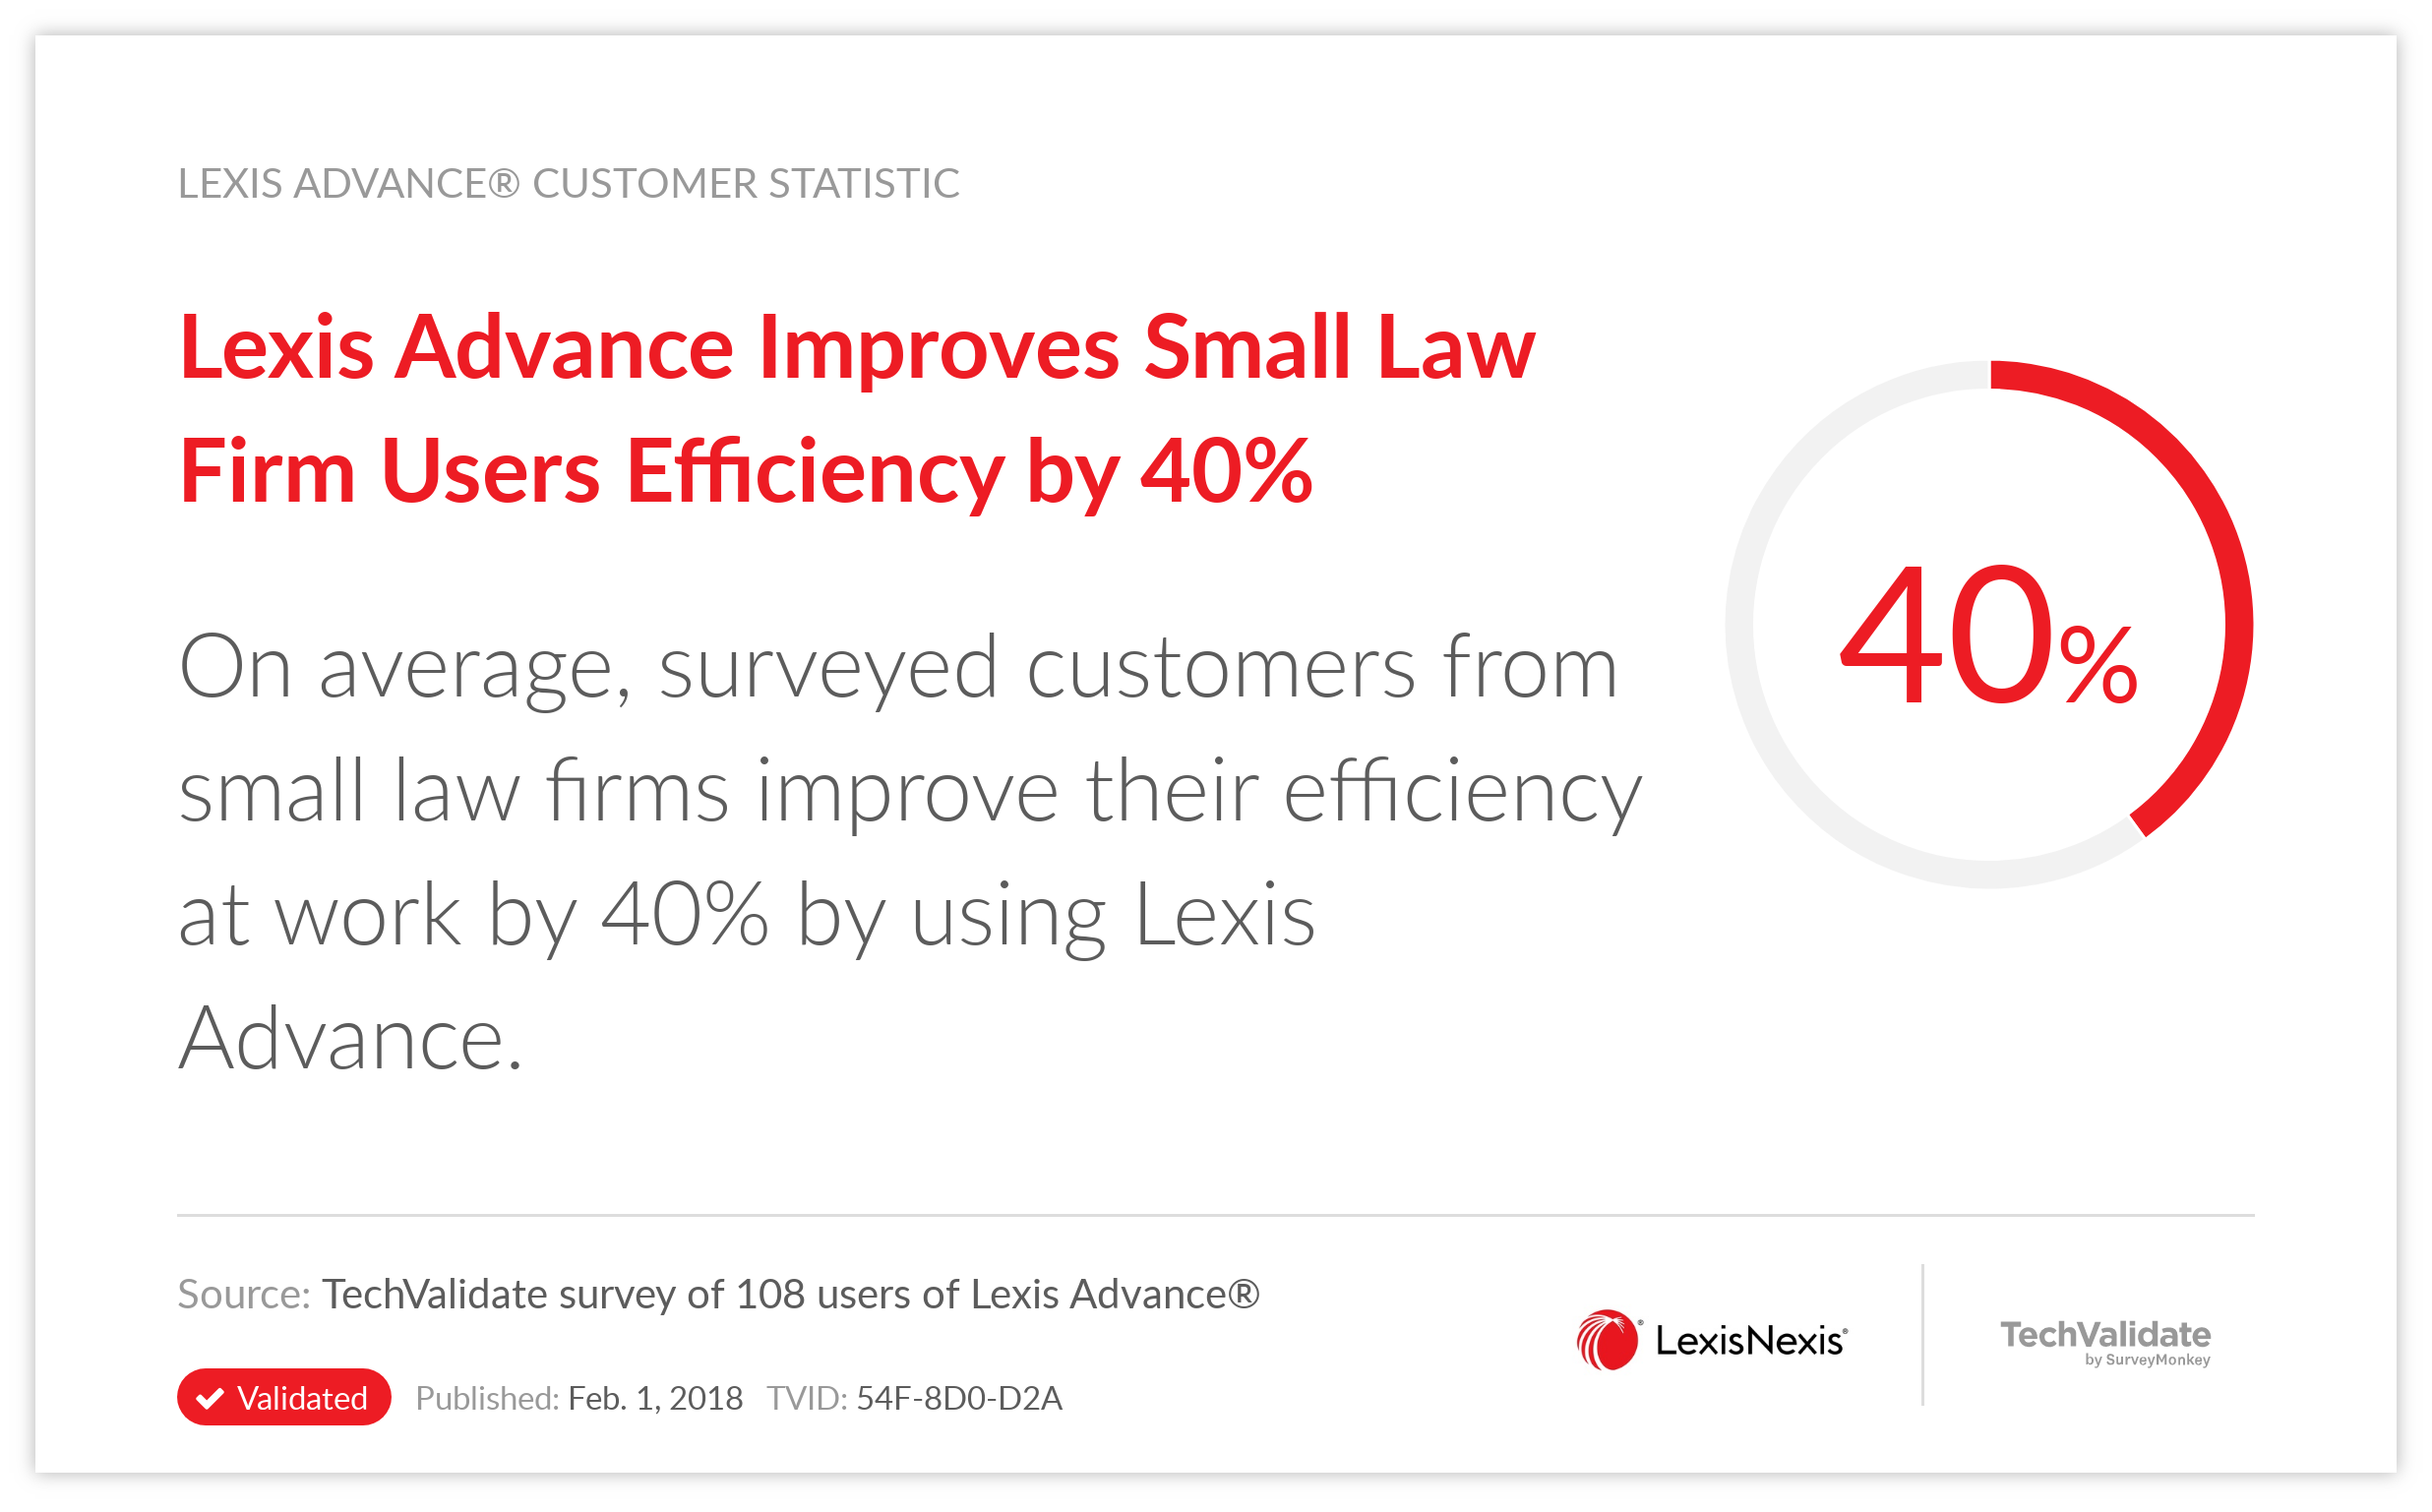 Lexis Advance Improves Small Law Firm Users Efficiency by 40%